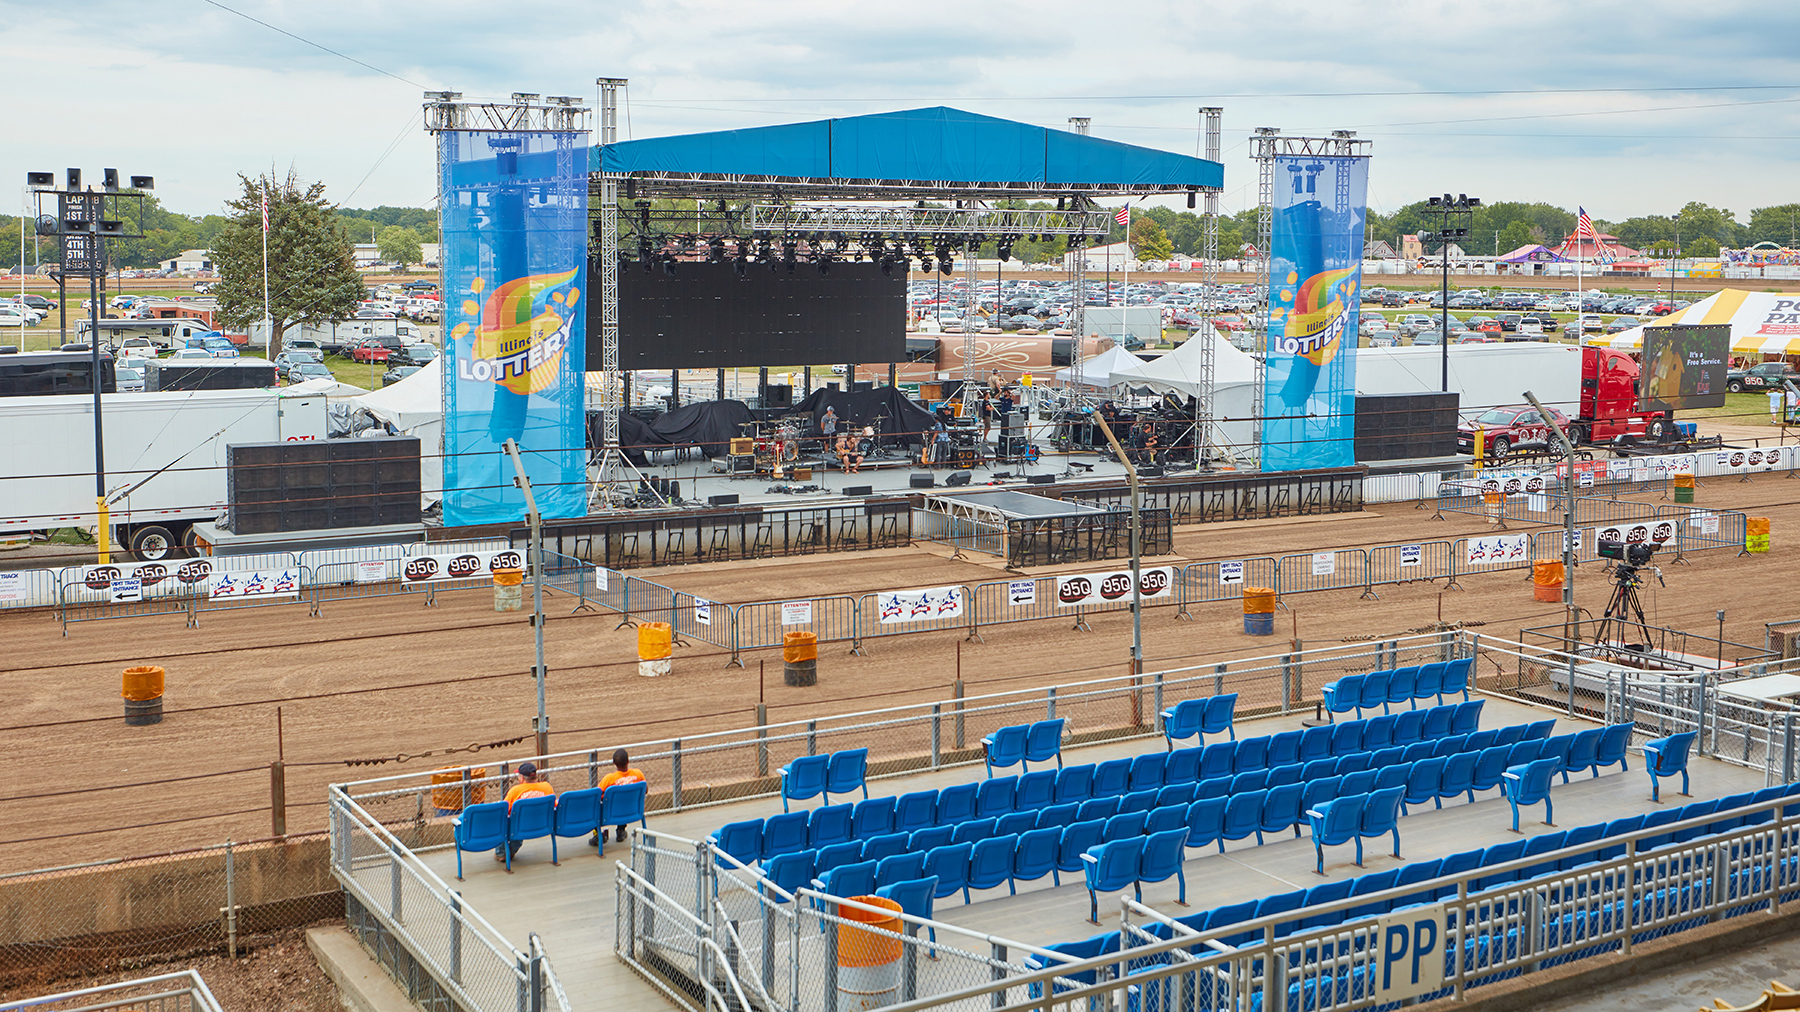 Il State Fair Grandstand Seating